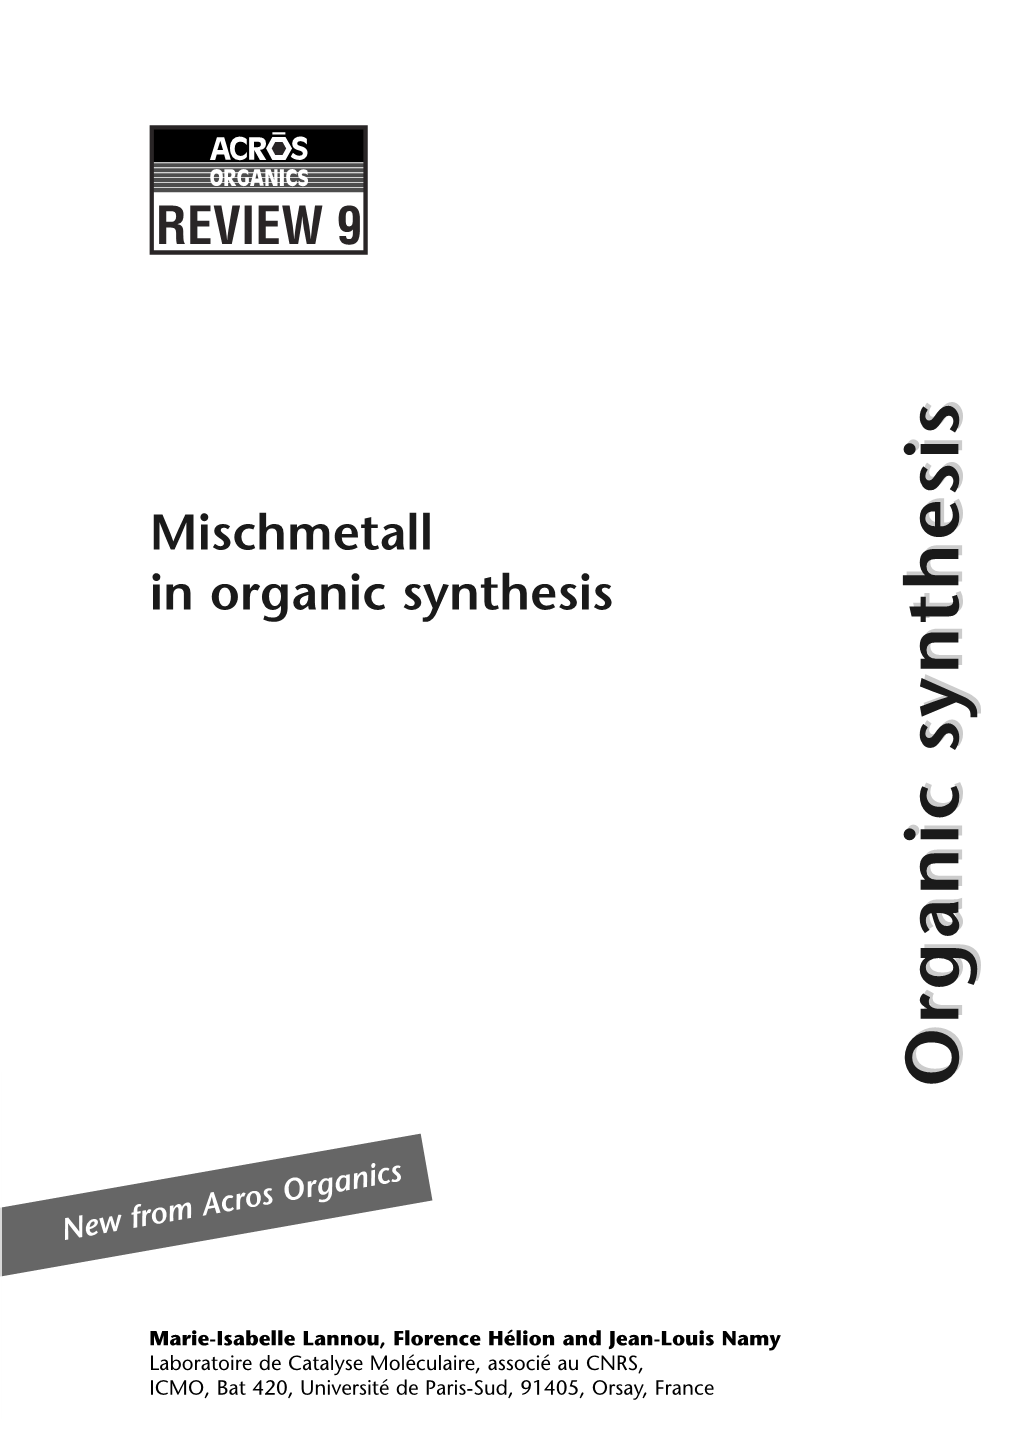 Some Uses of Mischmetall in Organic Synthesis